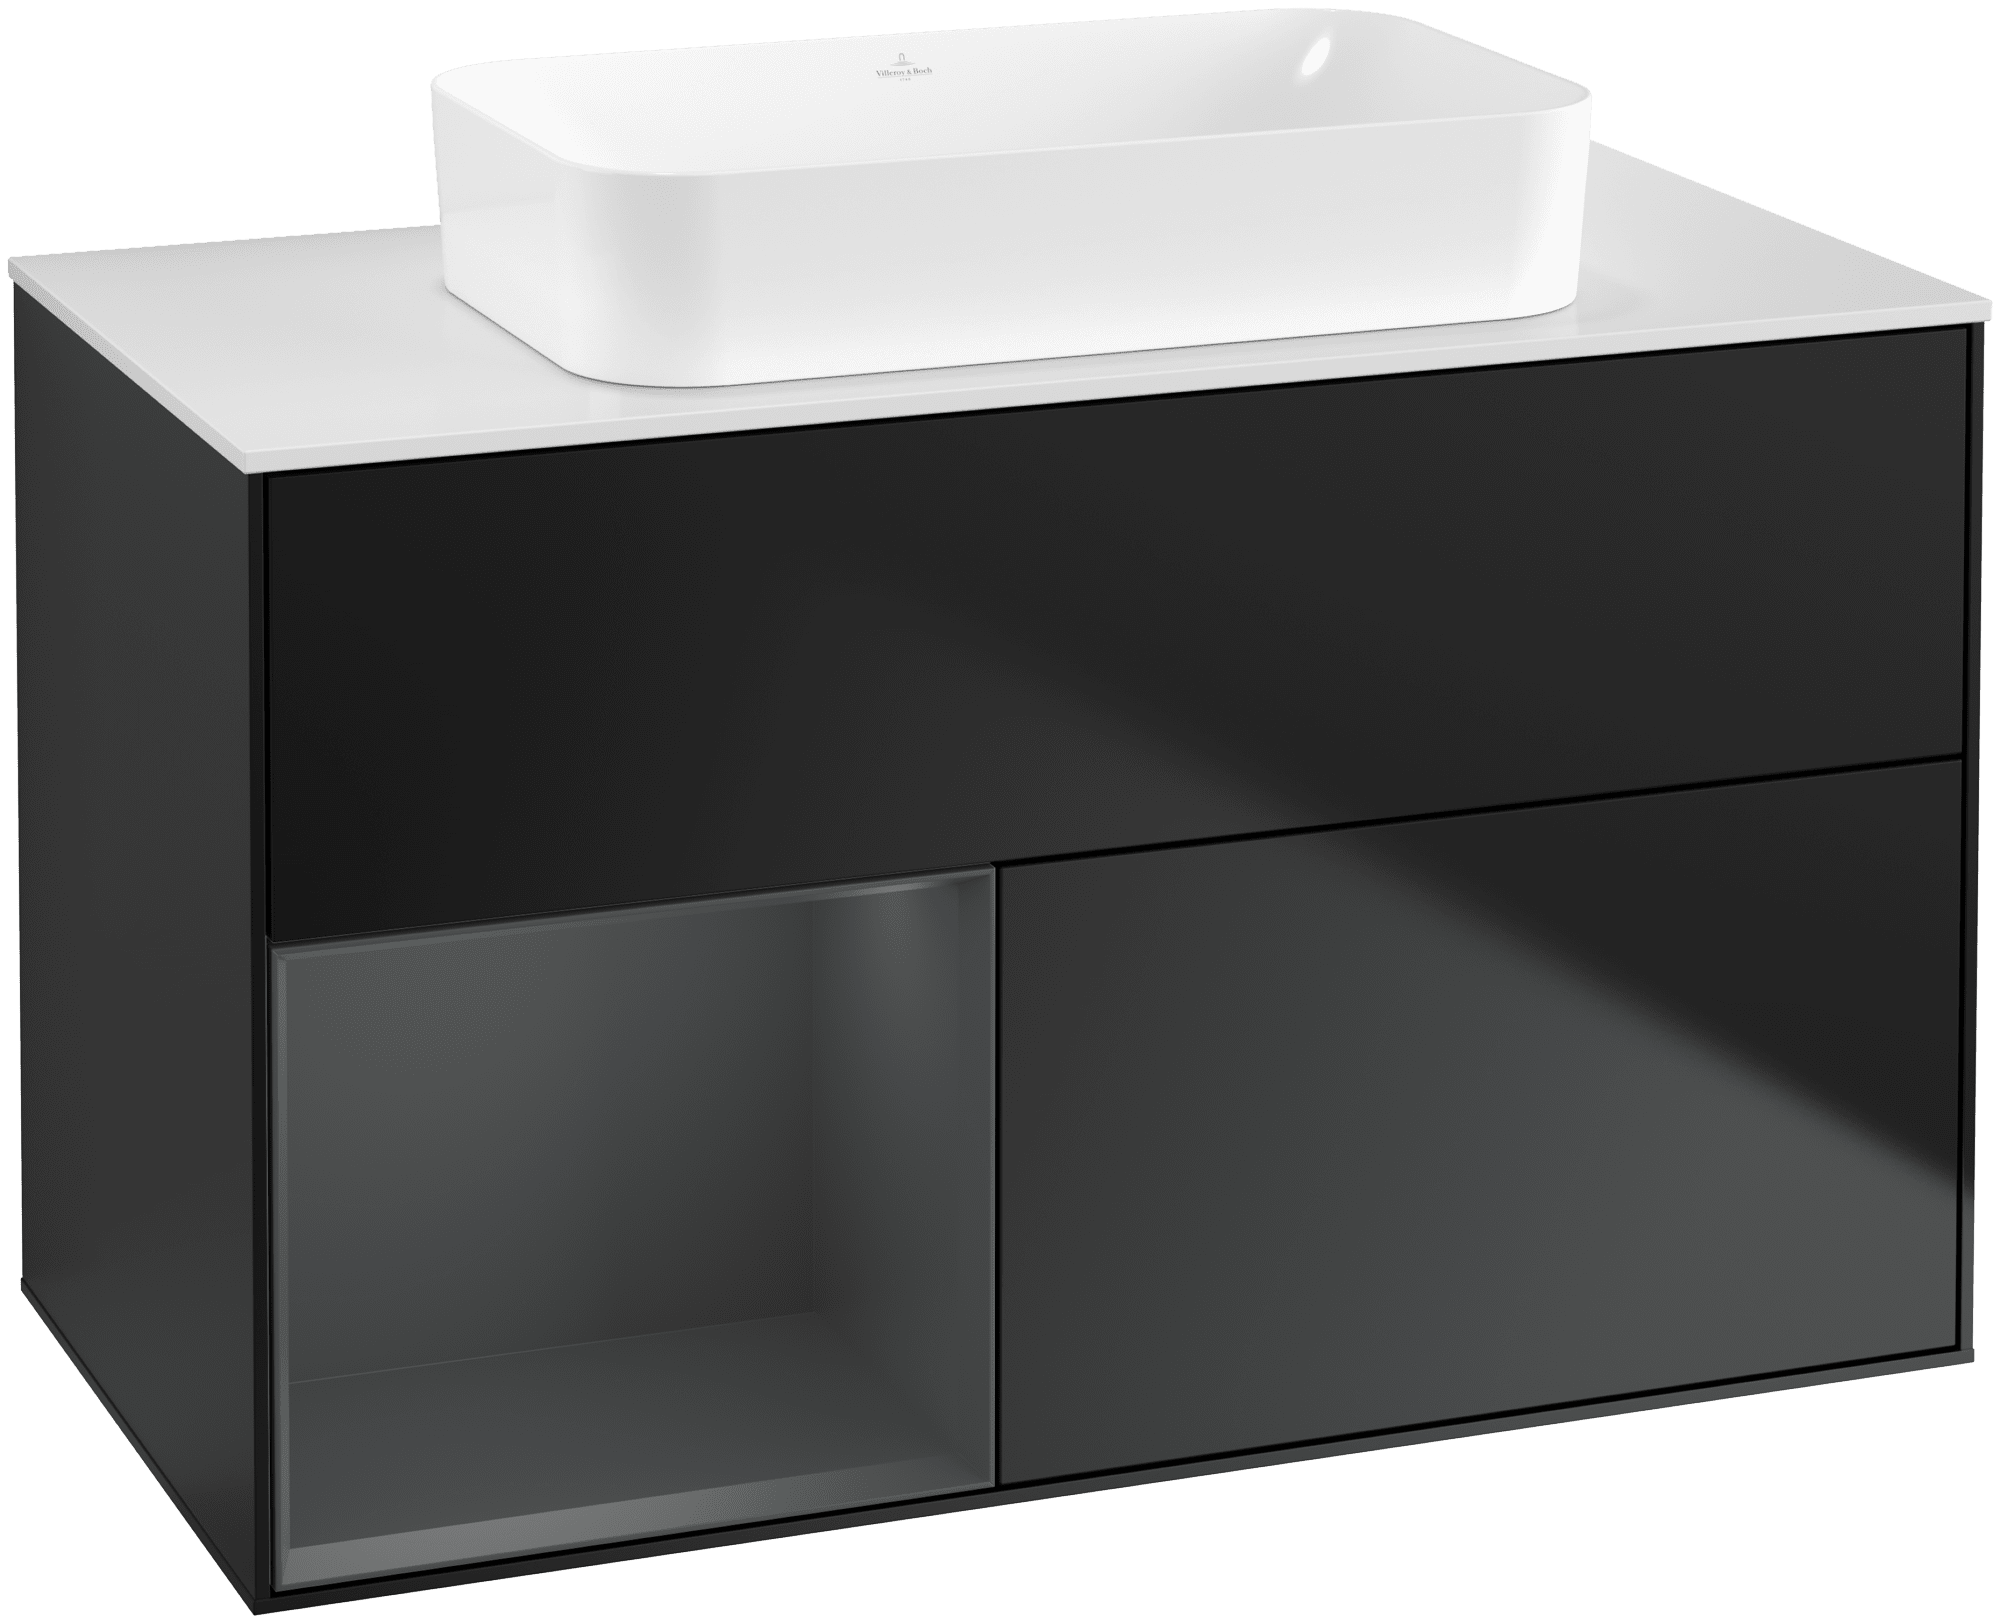 Picture of VILLEROY BOCH Finion Vanity unit, with lighting, 2 pull-out compartments, 1000 x 603 x 501 mm, Black Matt Lacquer / Midnight Blue Matt Lacquer / Glass White Matt #G651HGPD